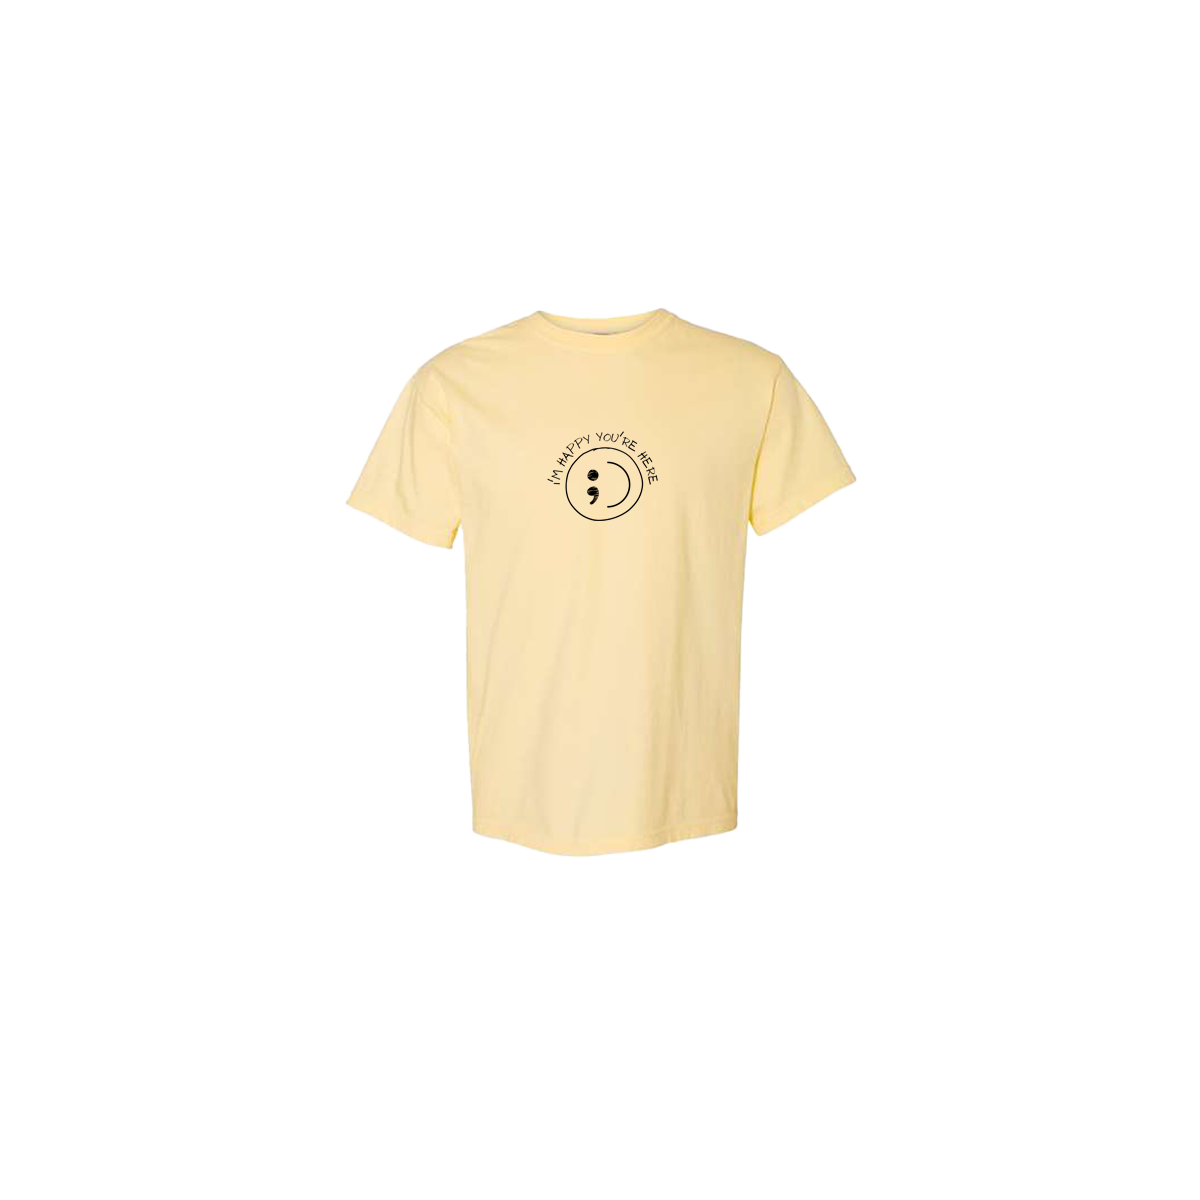 I'm Happy You're Here Embroidered Yellow Tshirt - Mental Health Awareness Clothing